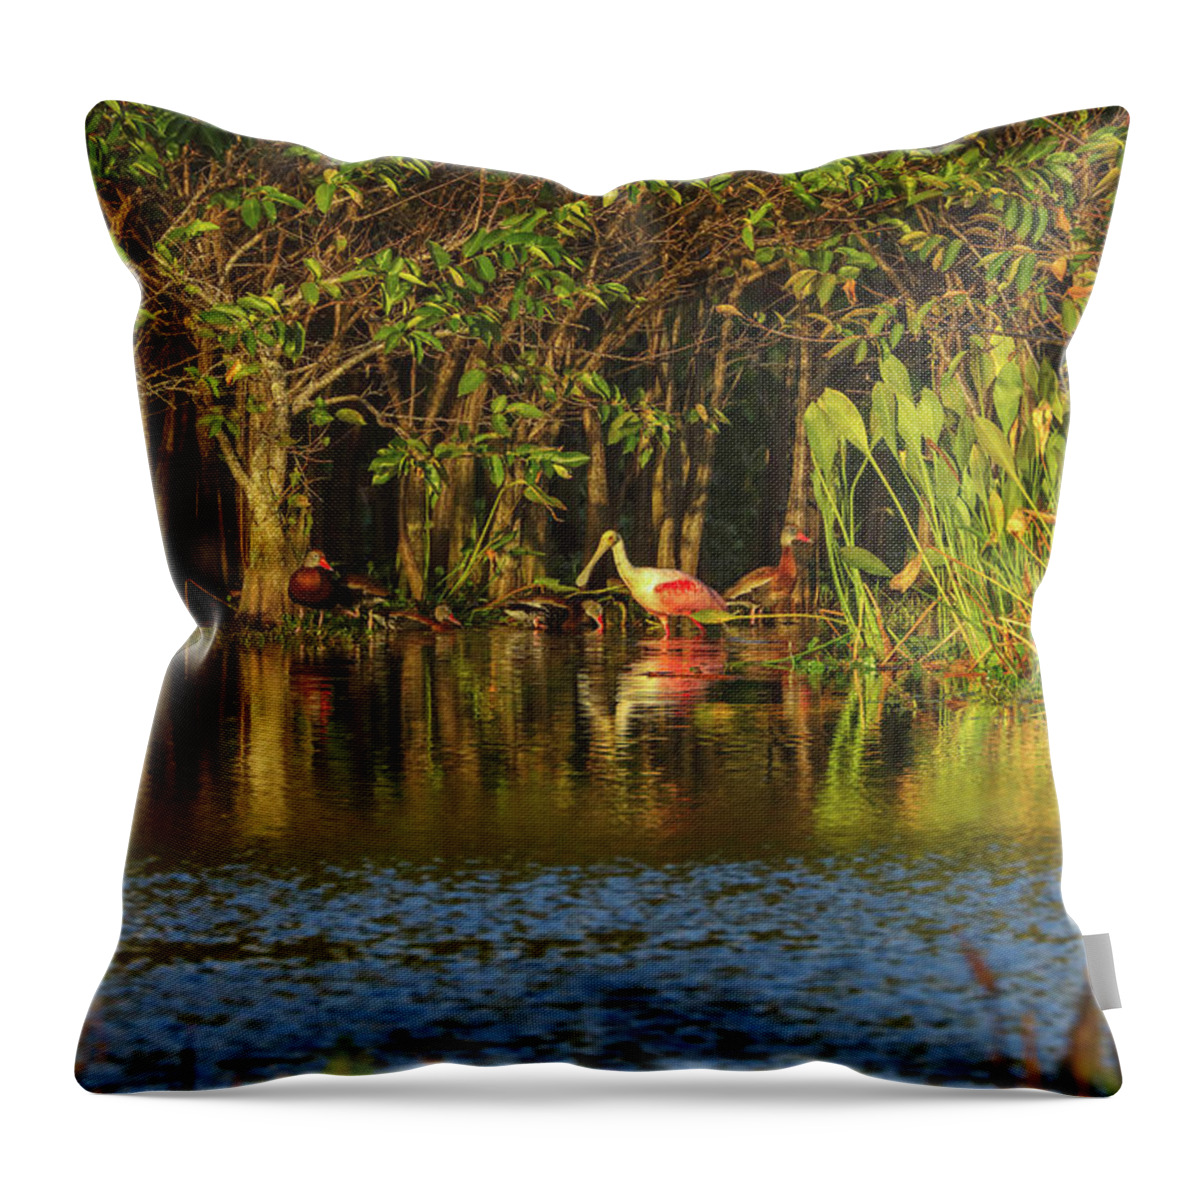 Spoonbill Throw Pillow featuring the photograph Rooseate Spoonbill by Juergen Roth